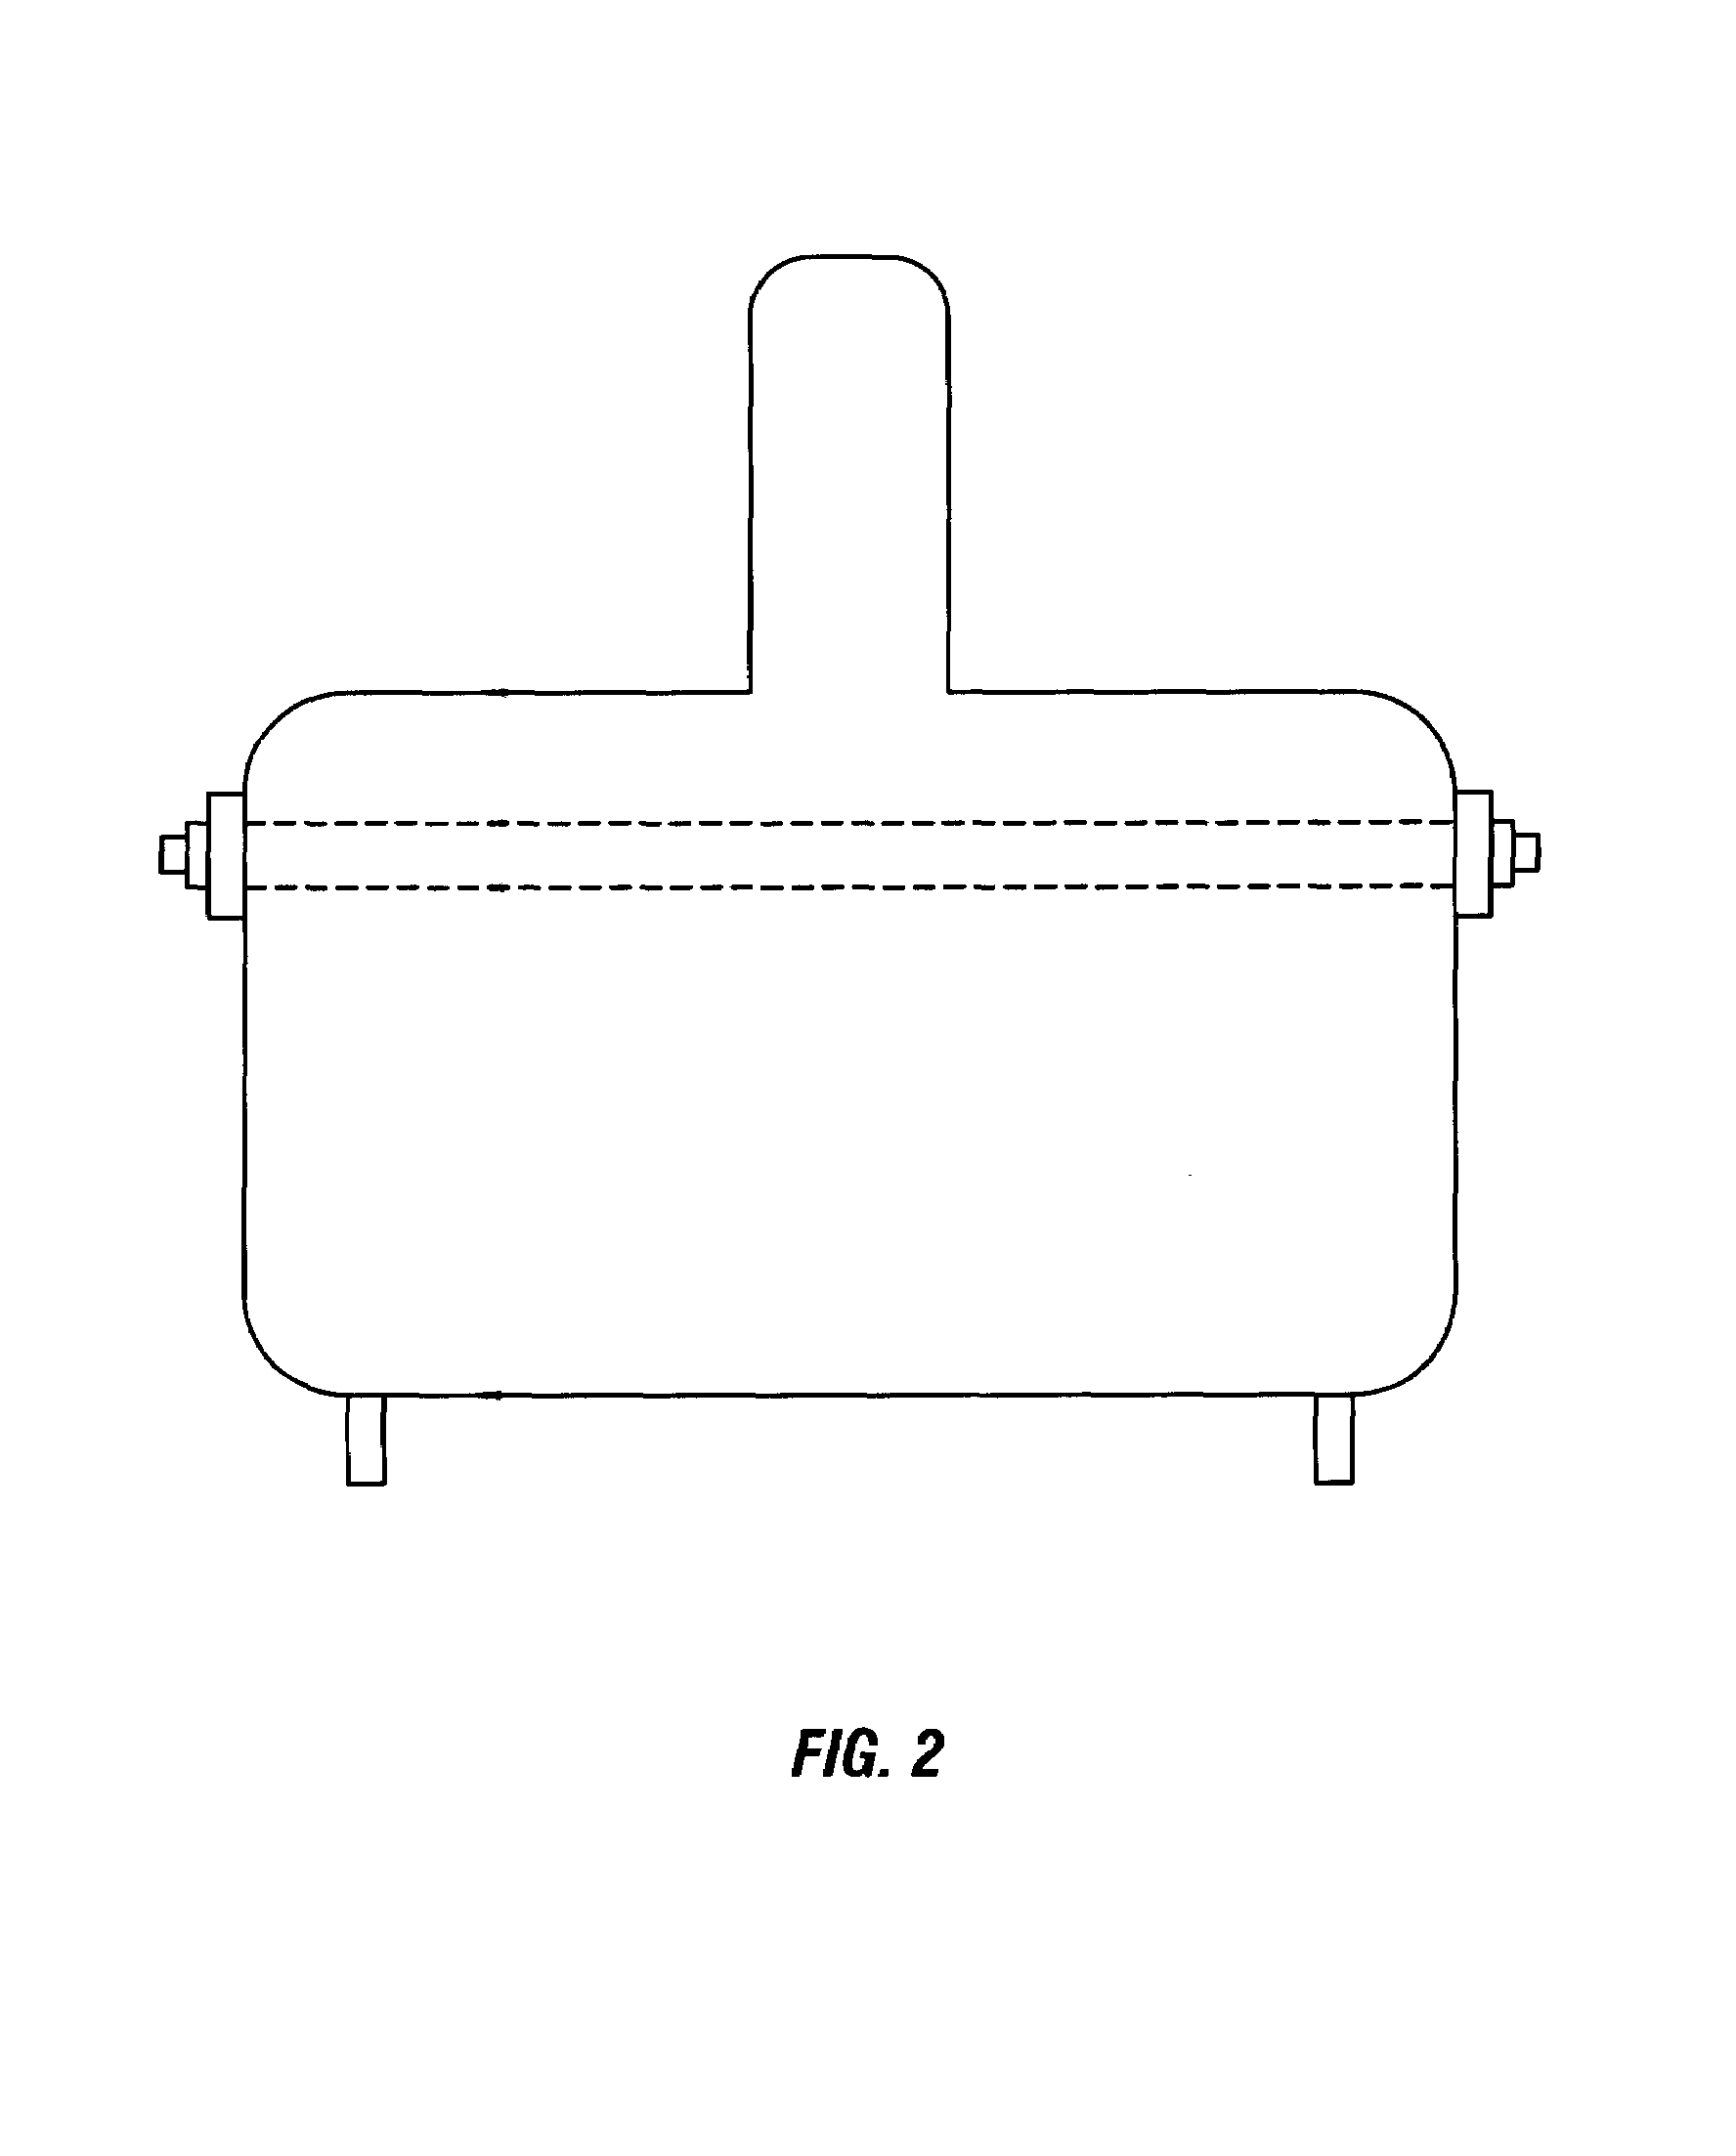 Resonant frequency adjustment using tunable damping rods